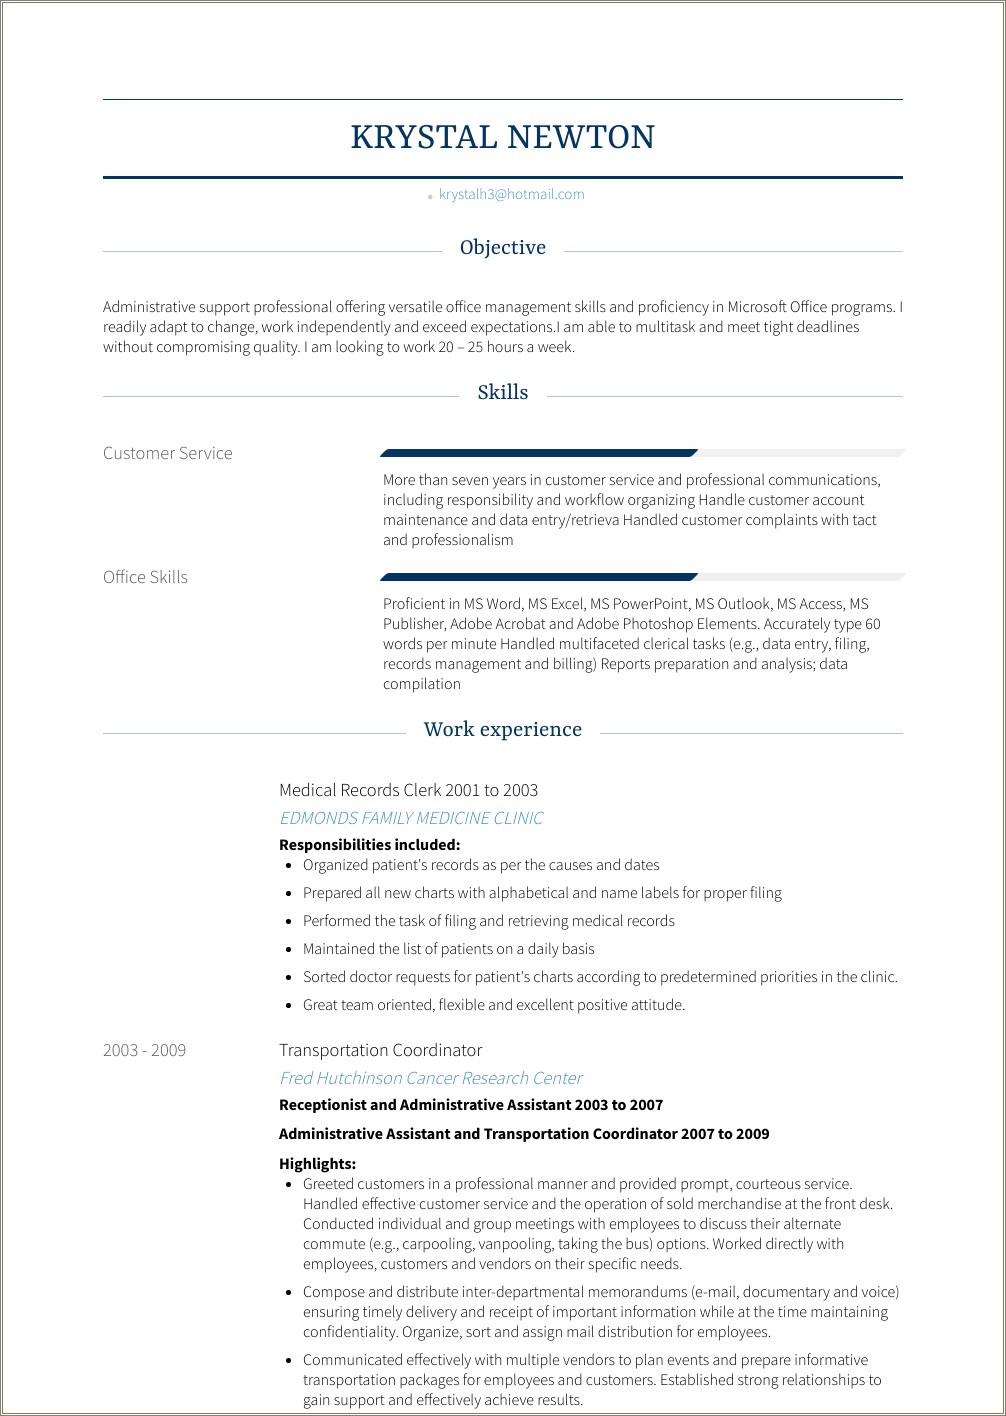 Direct Support Professional And Medical Clerk Resume Sample